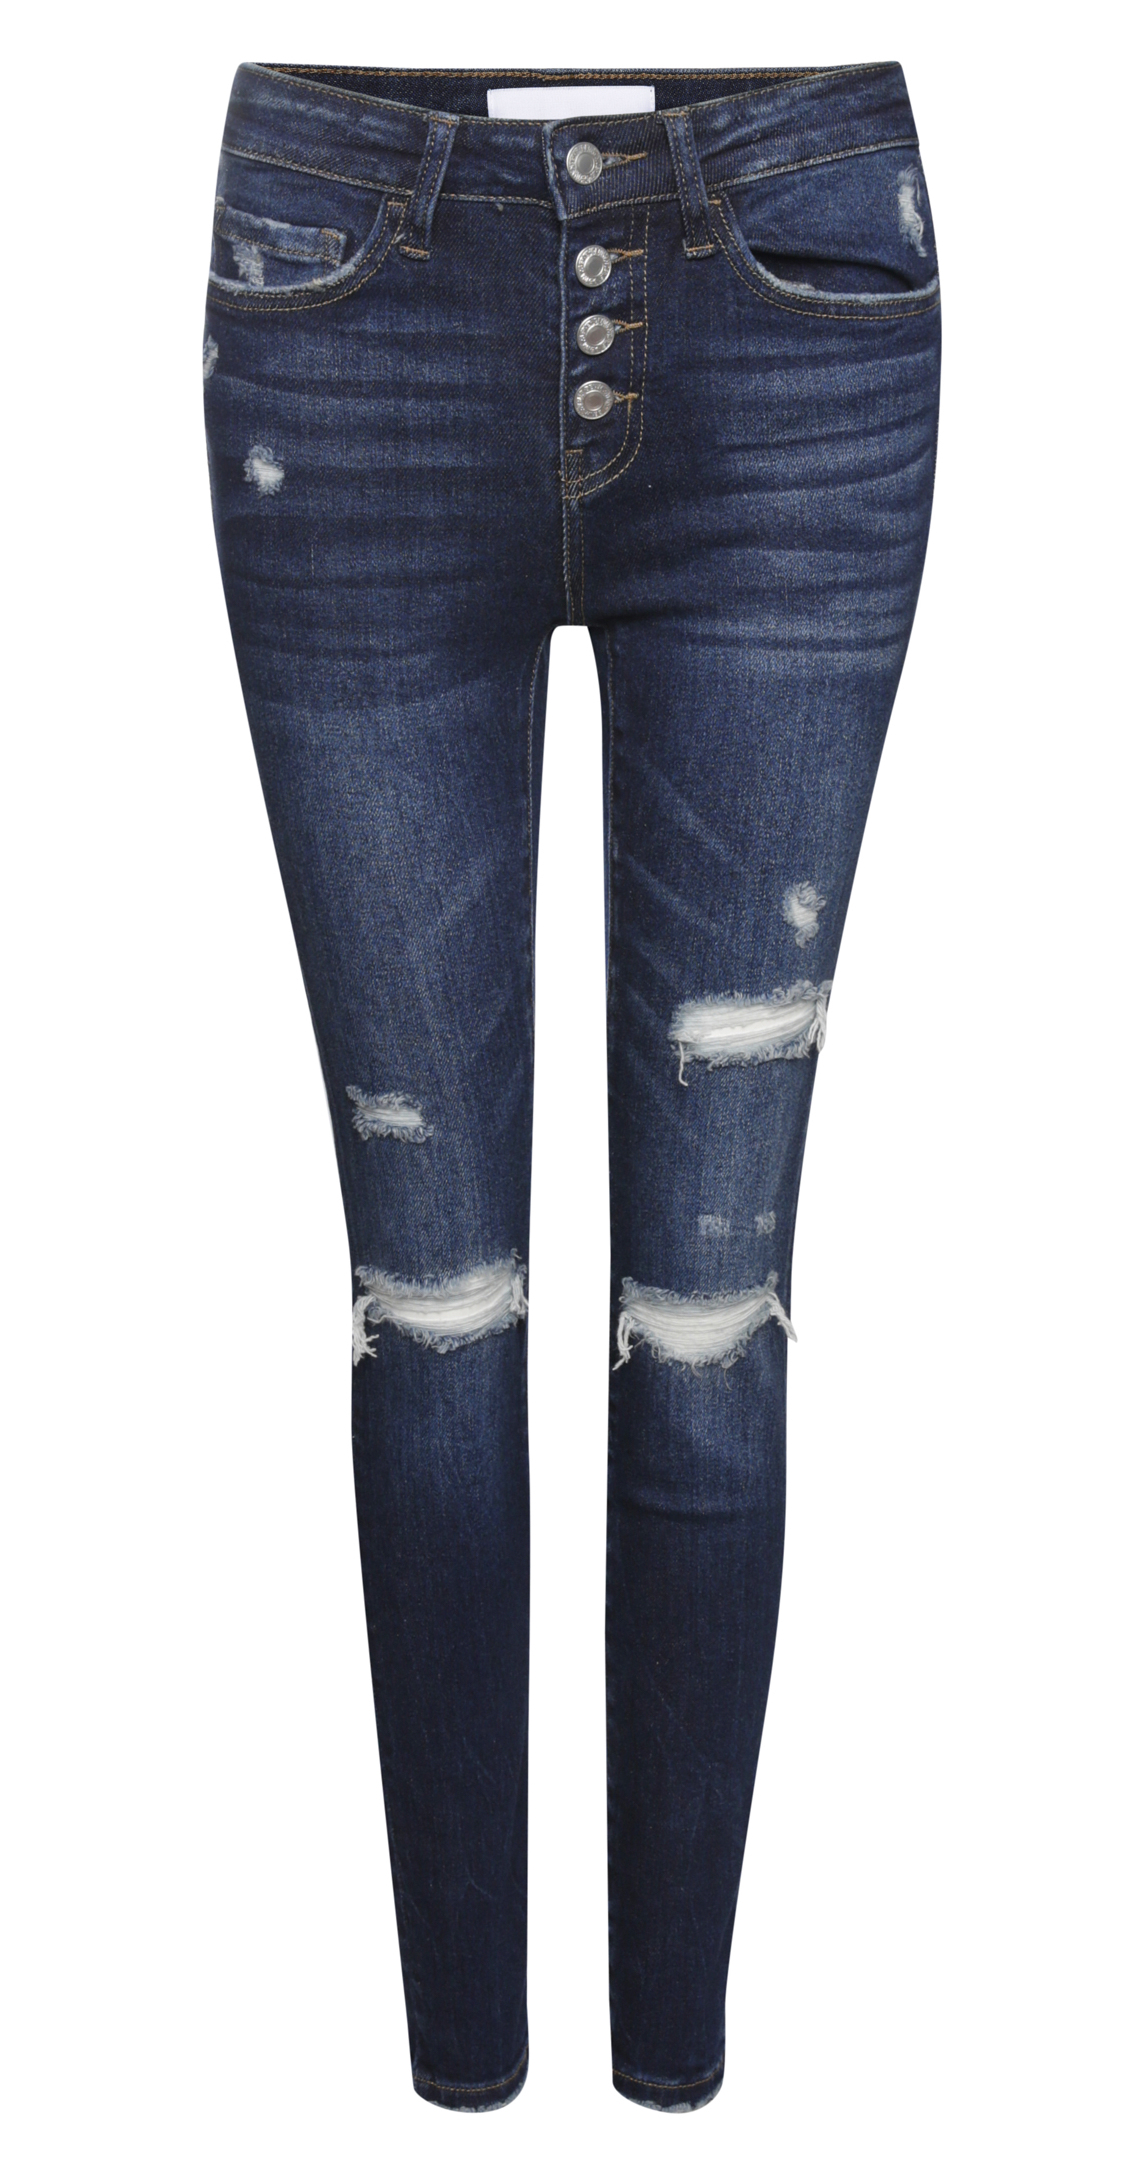 Distressed Exposed Button Fly Ankle Denim